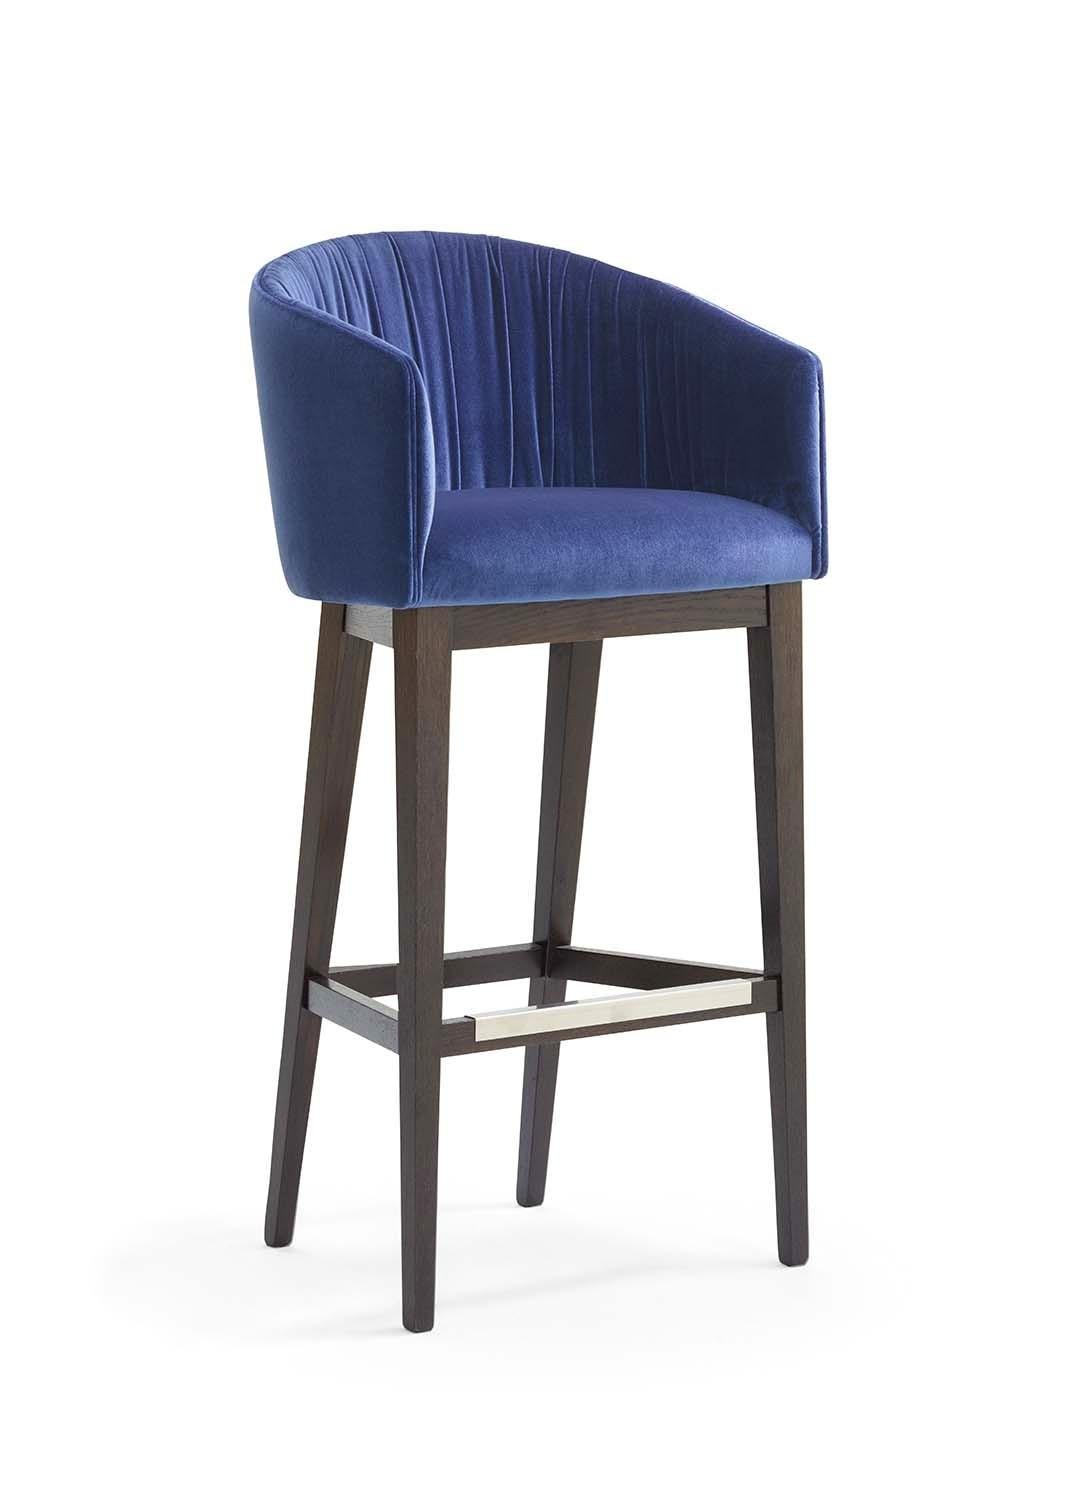 Modern Contemporary Dining Chair Offered in Velvet For Sale